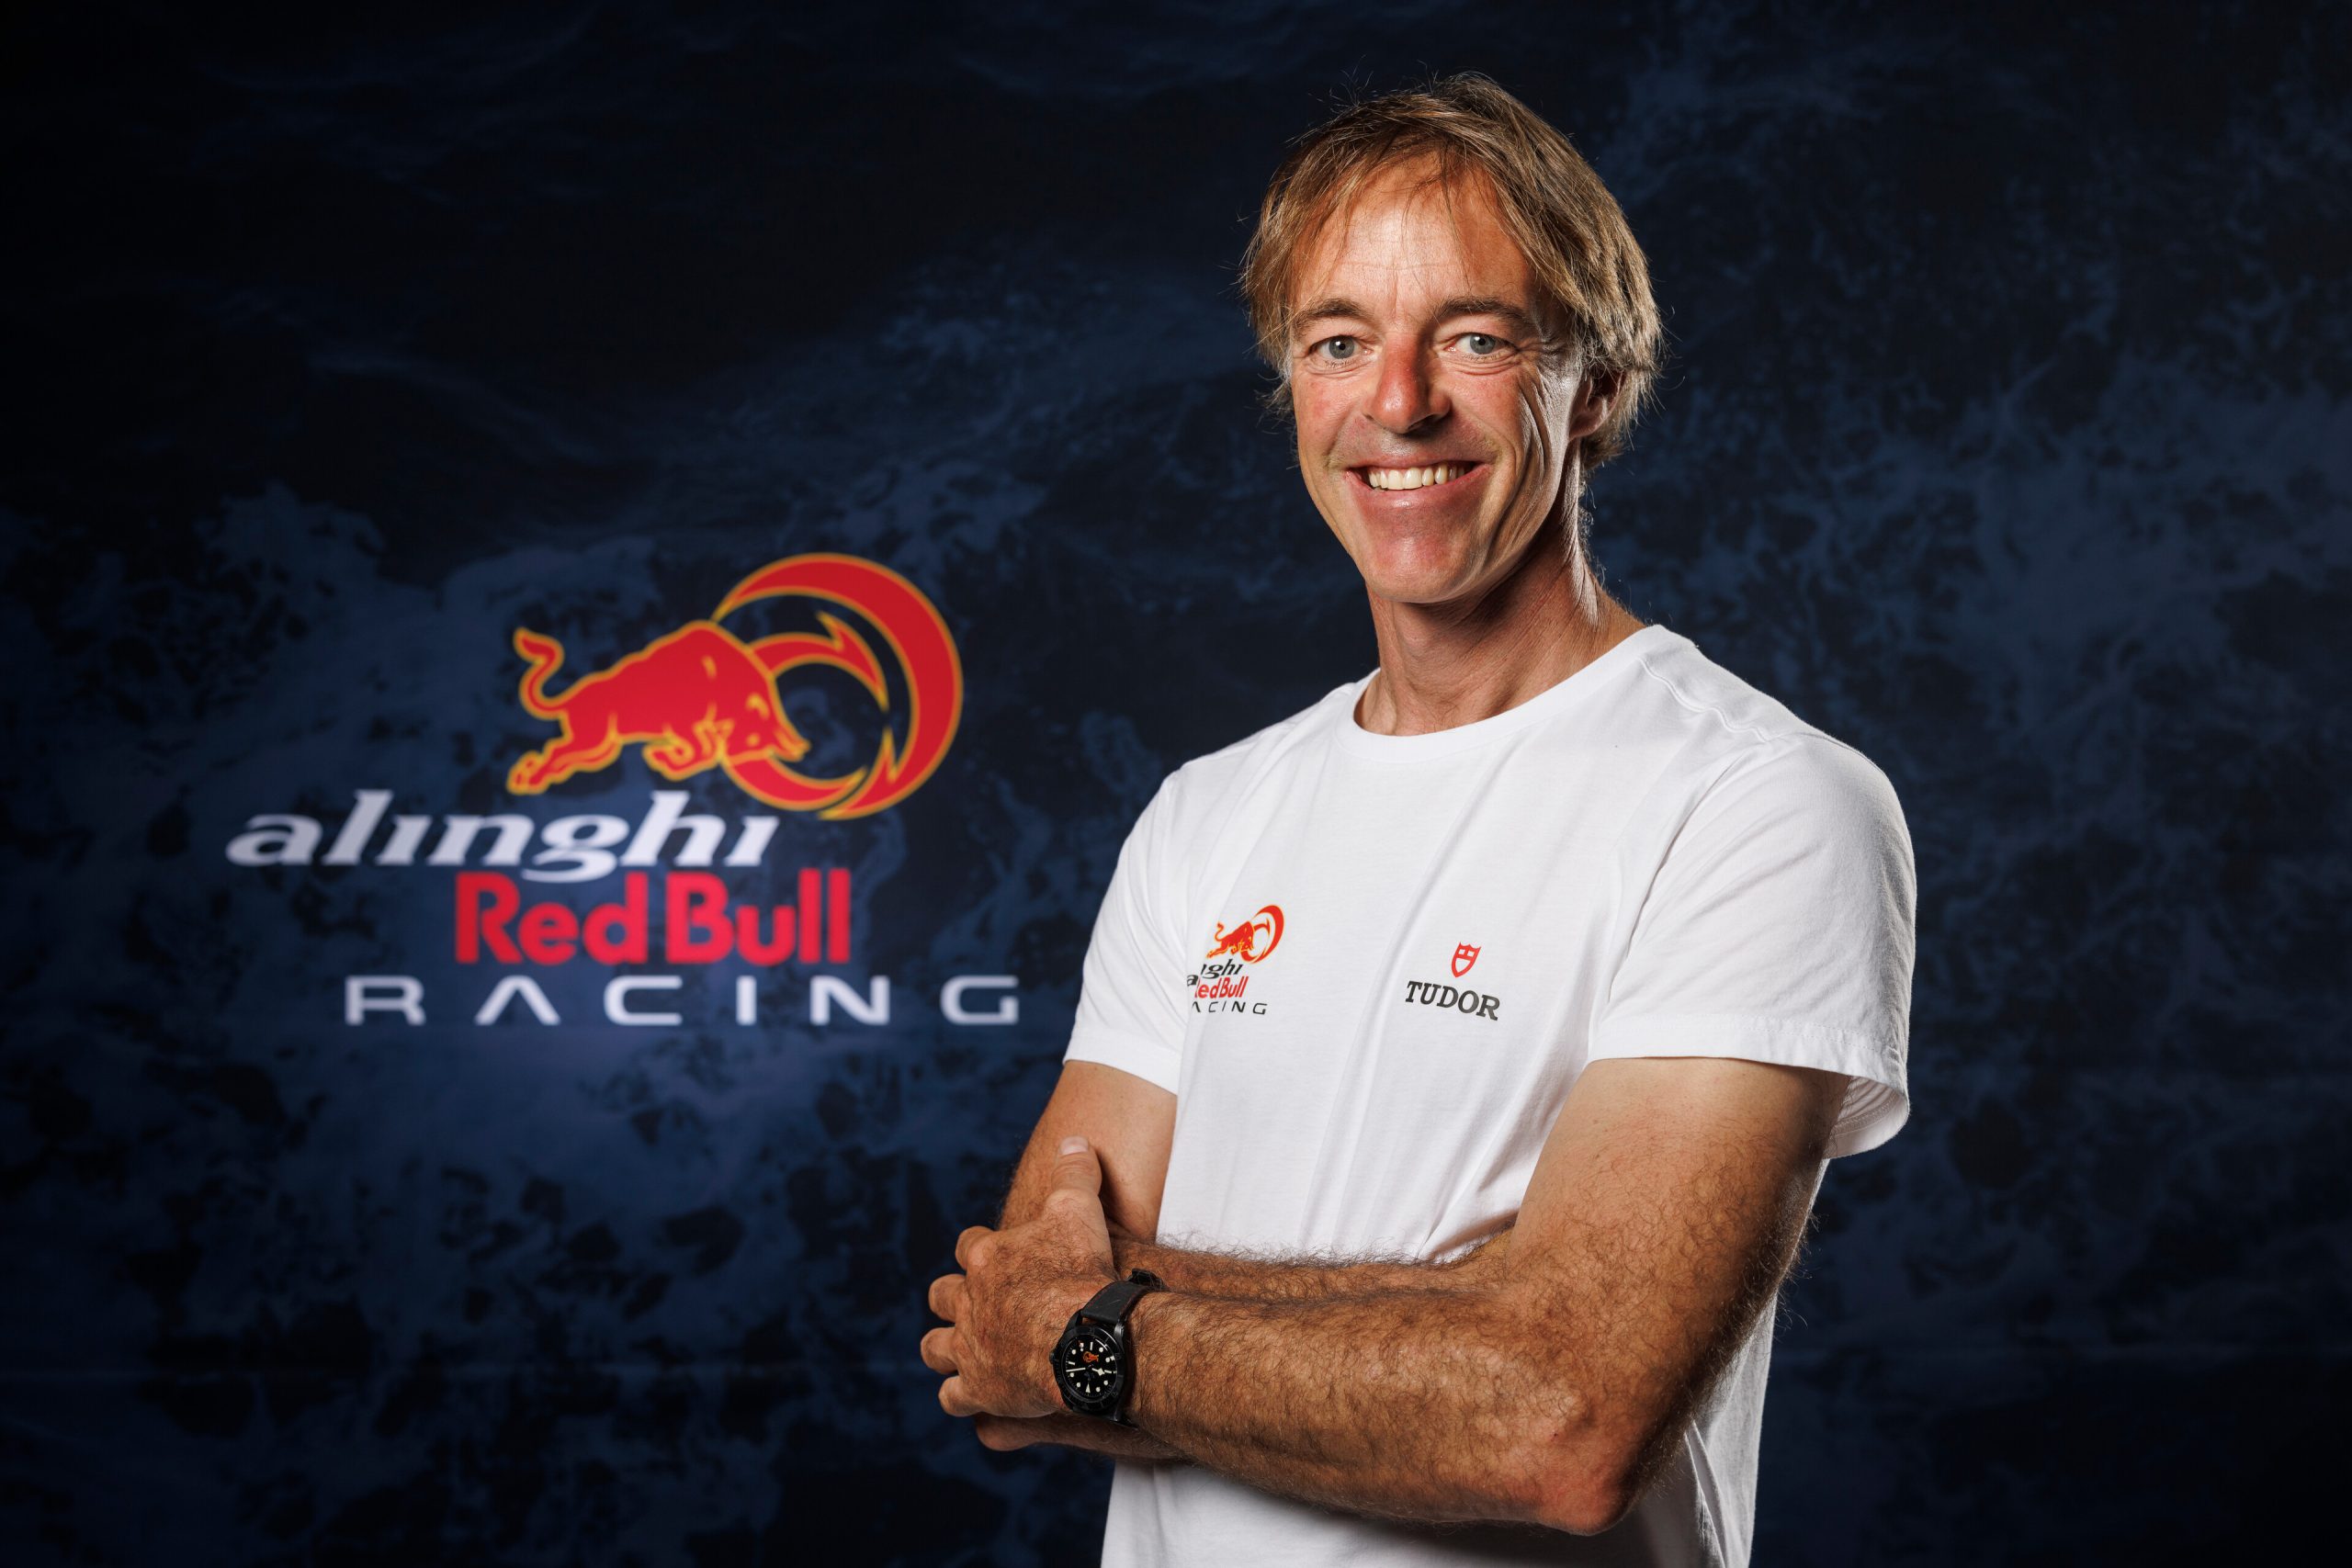 FROM SAILING ENTHUSIAST TO AMERICA’S CUP: THE INSPIRING JOURNEY OF NILS FREI